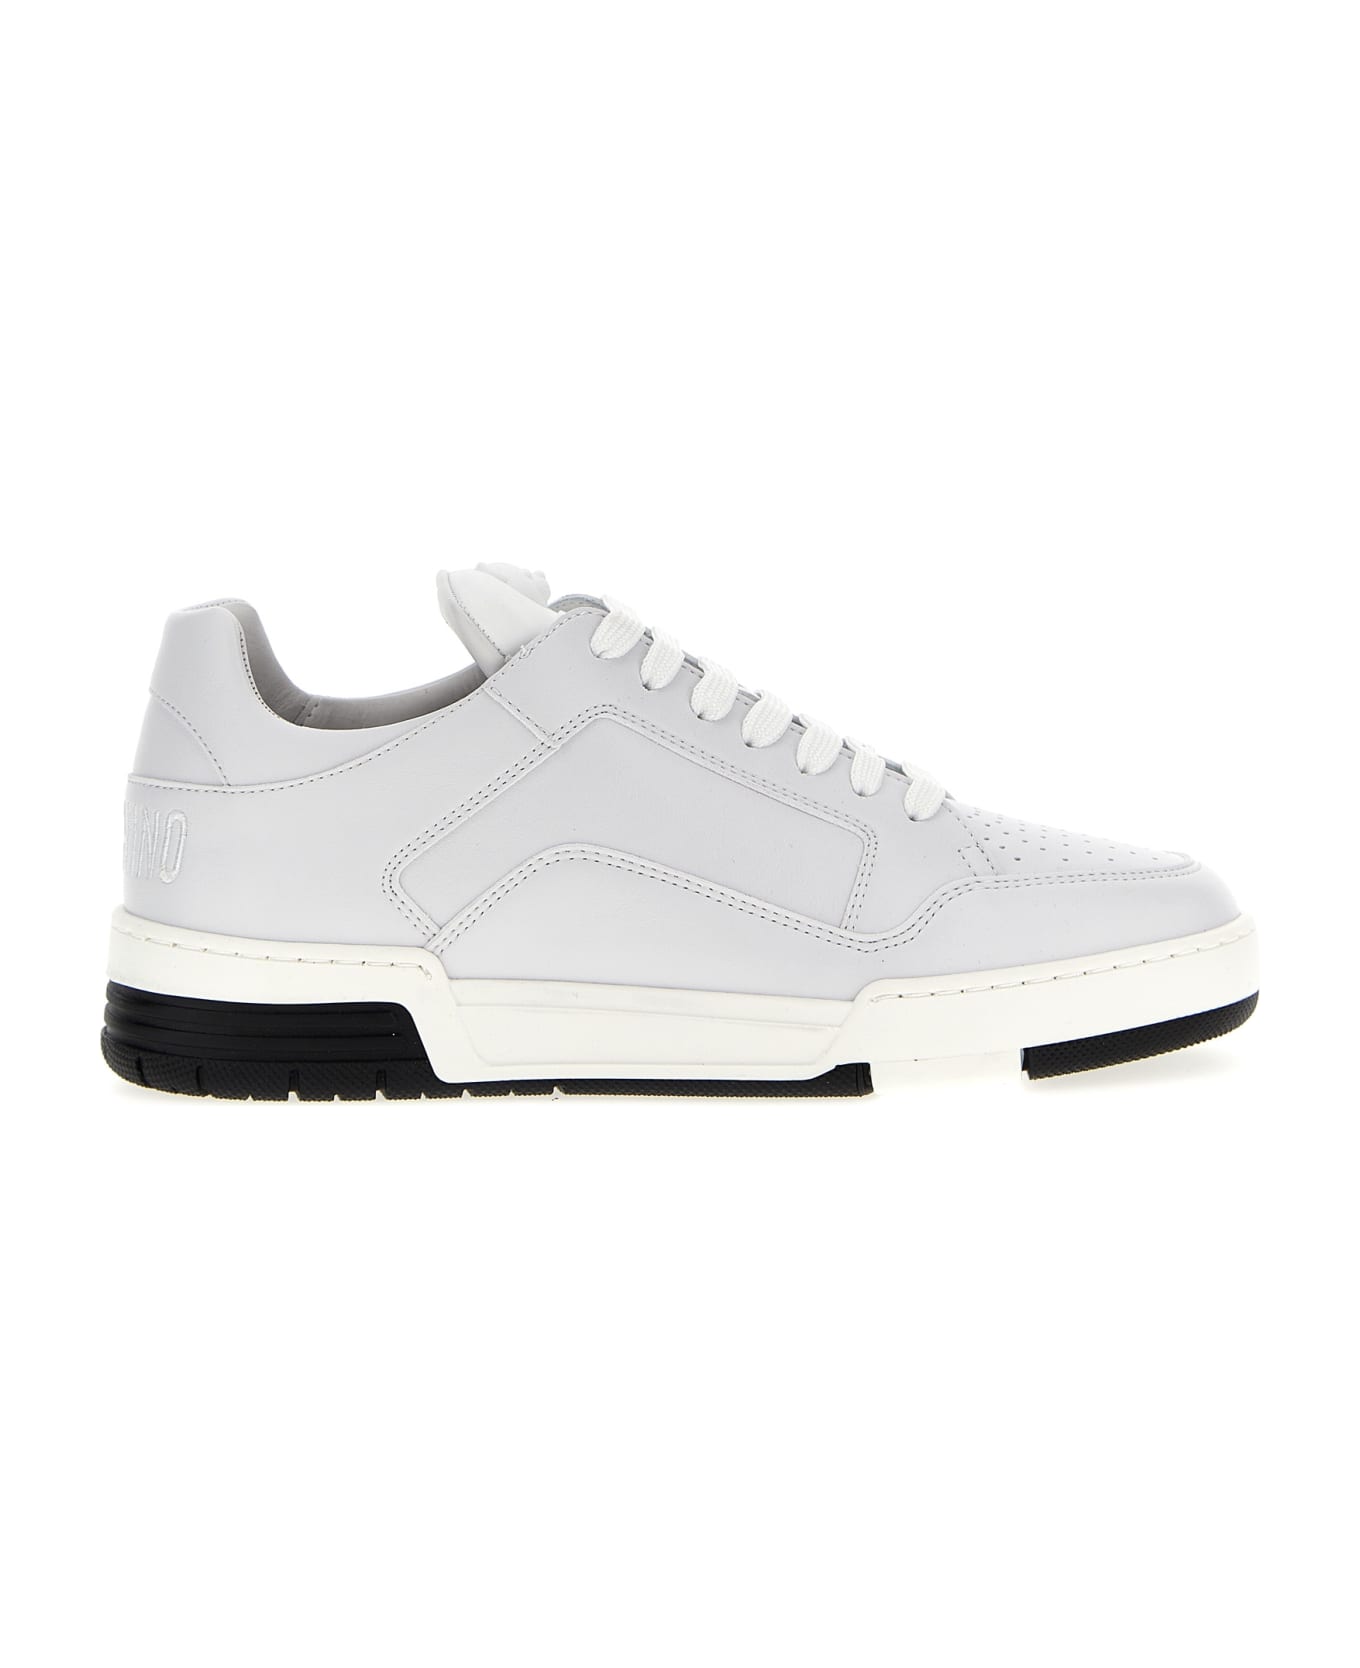 Moschino 'kevin' Sneakers - White